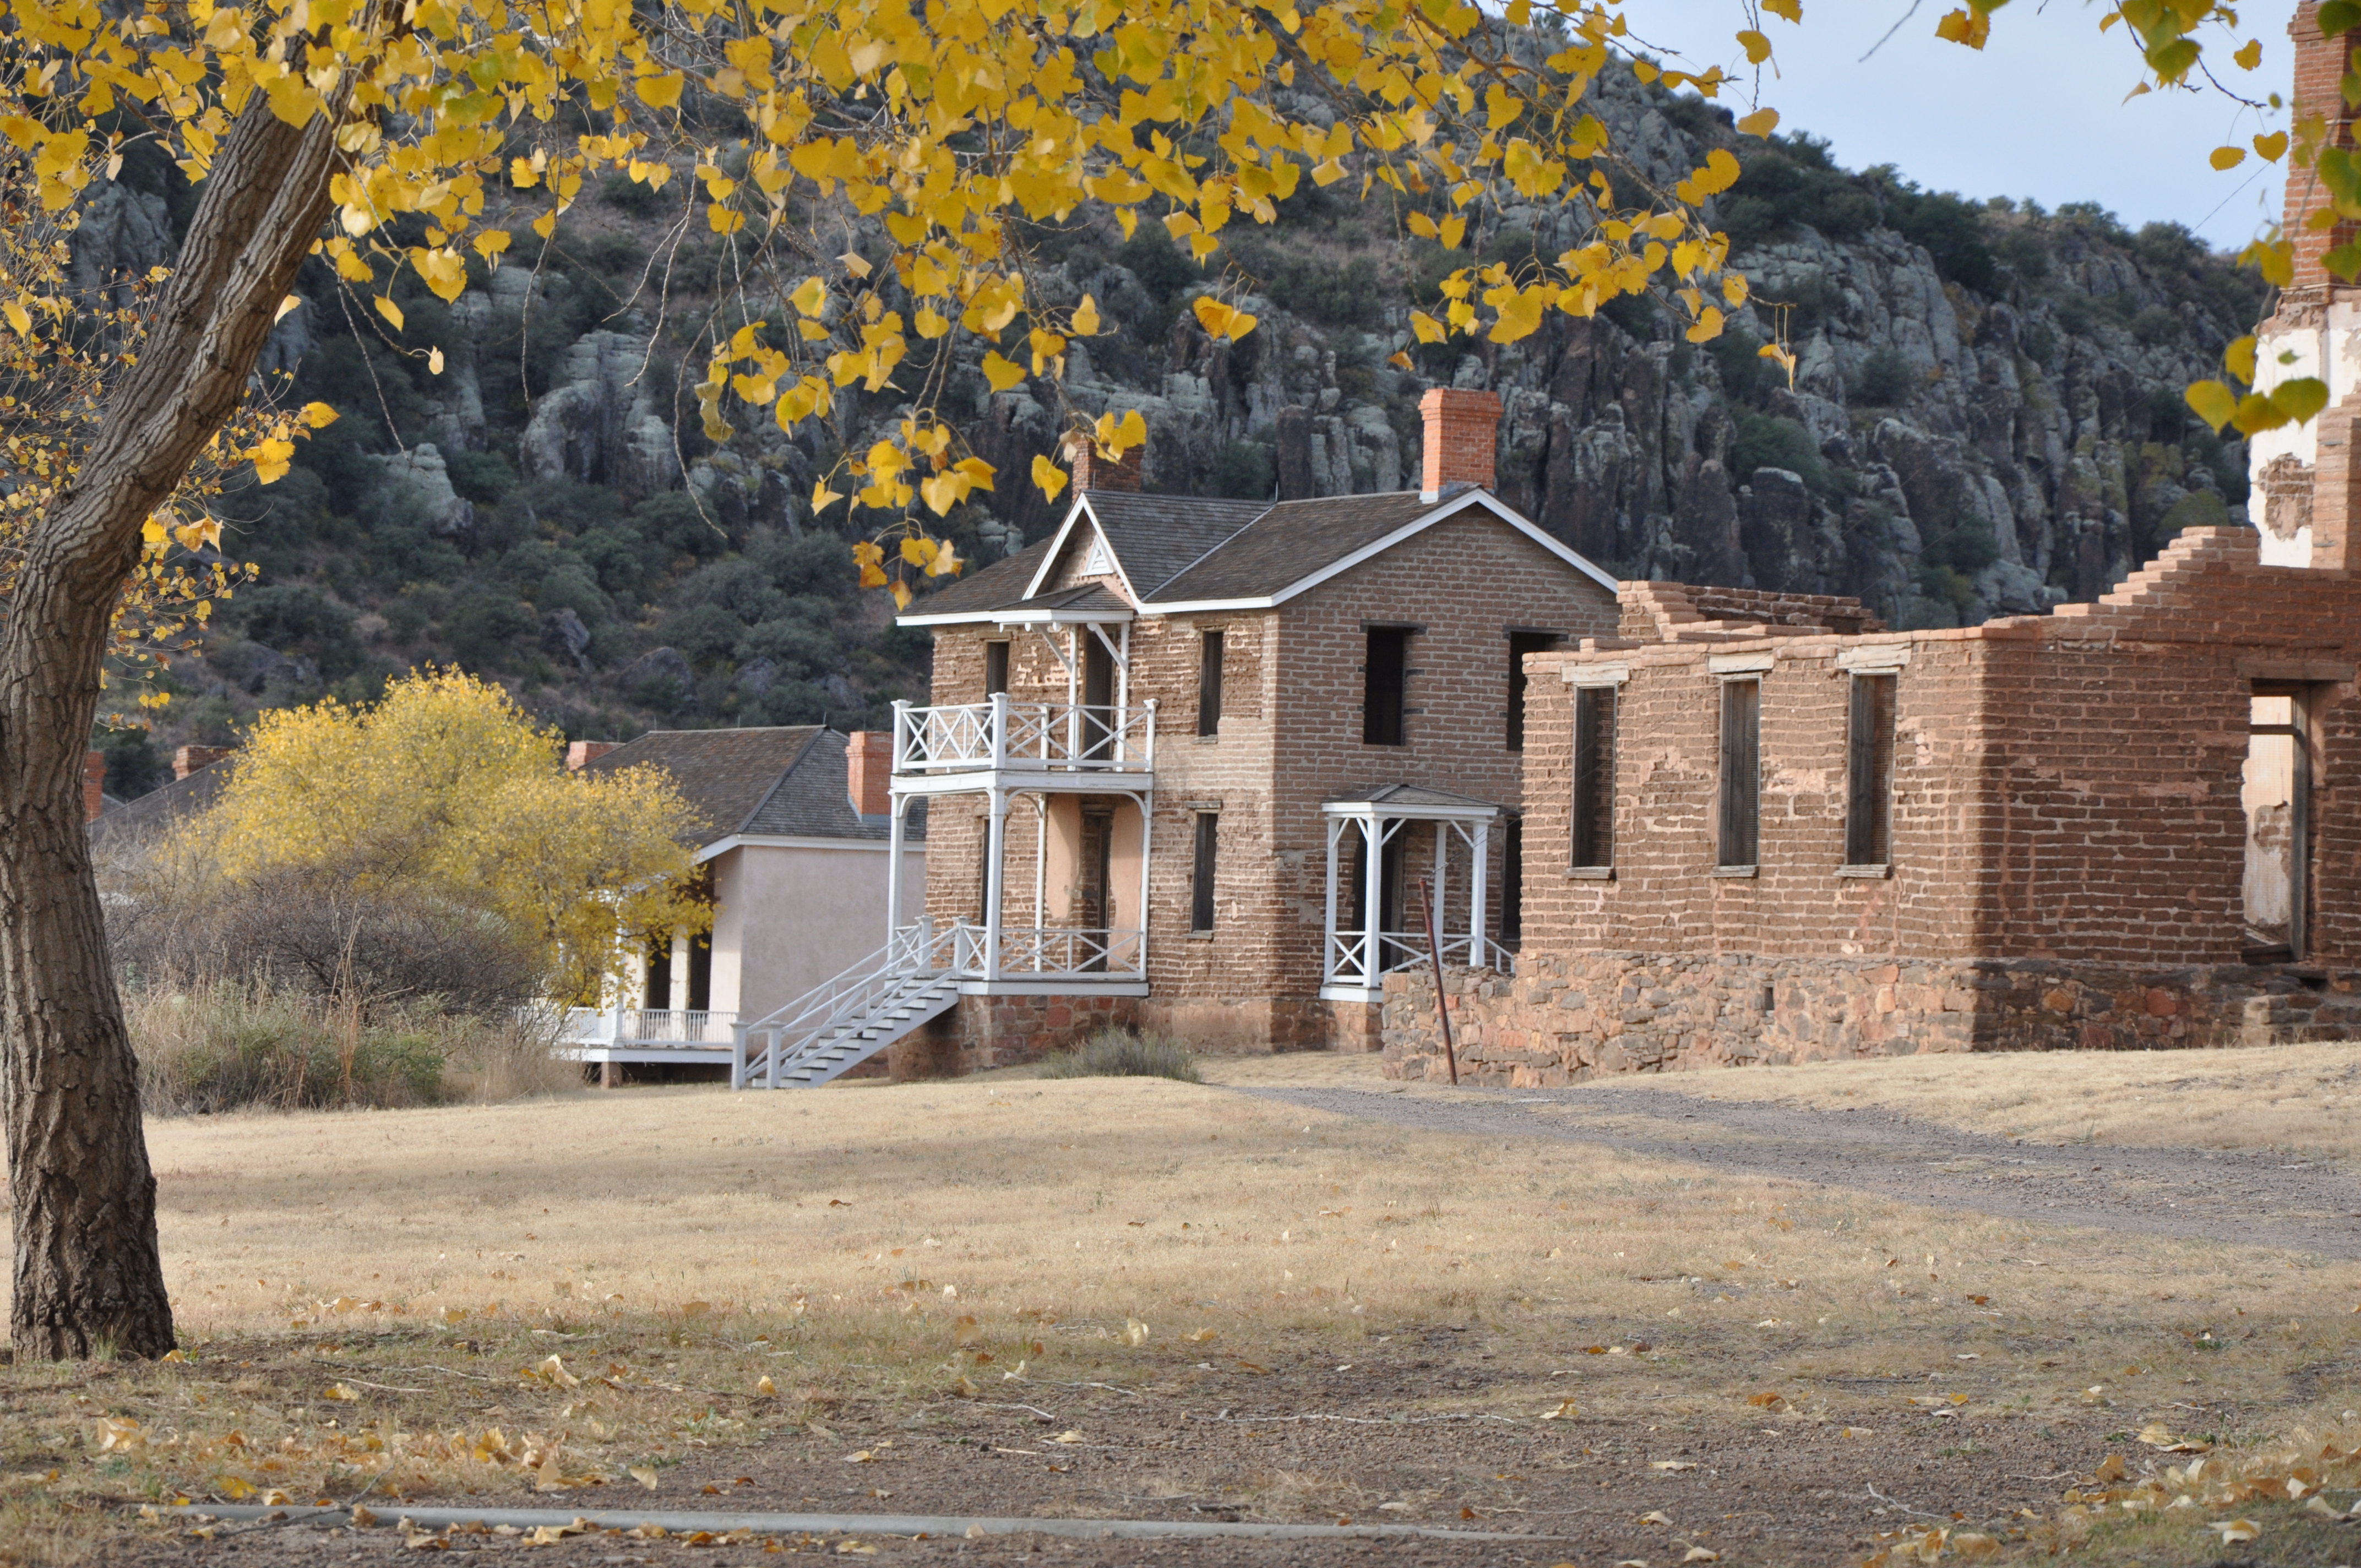 Building and trees at Fort Davis during the fall with yellow leaves.